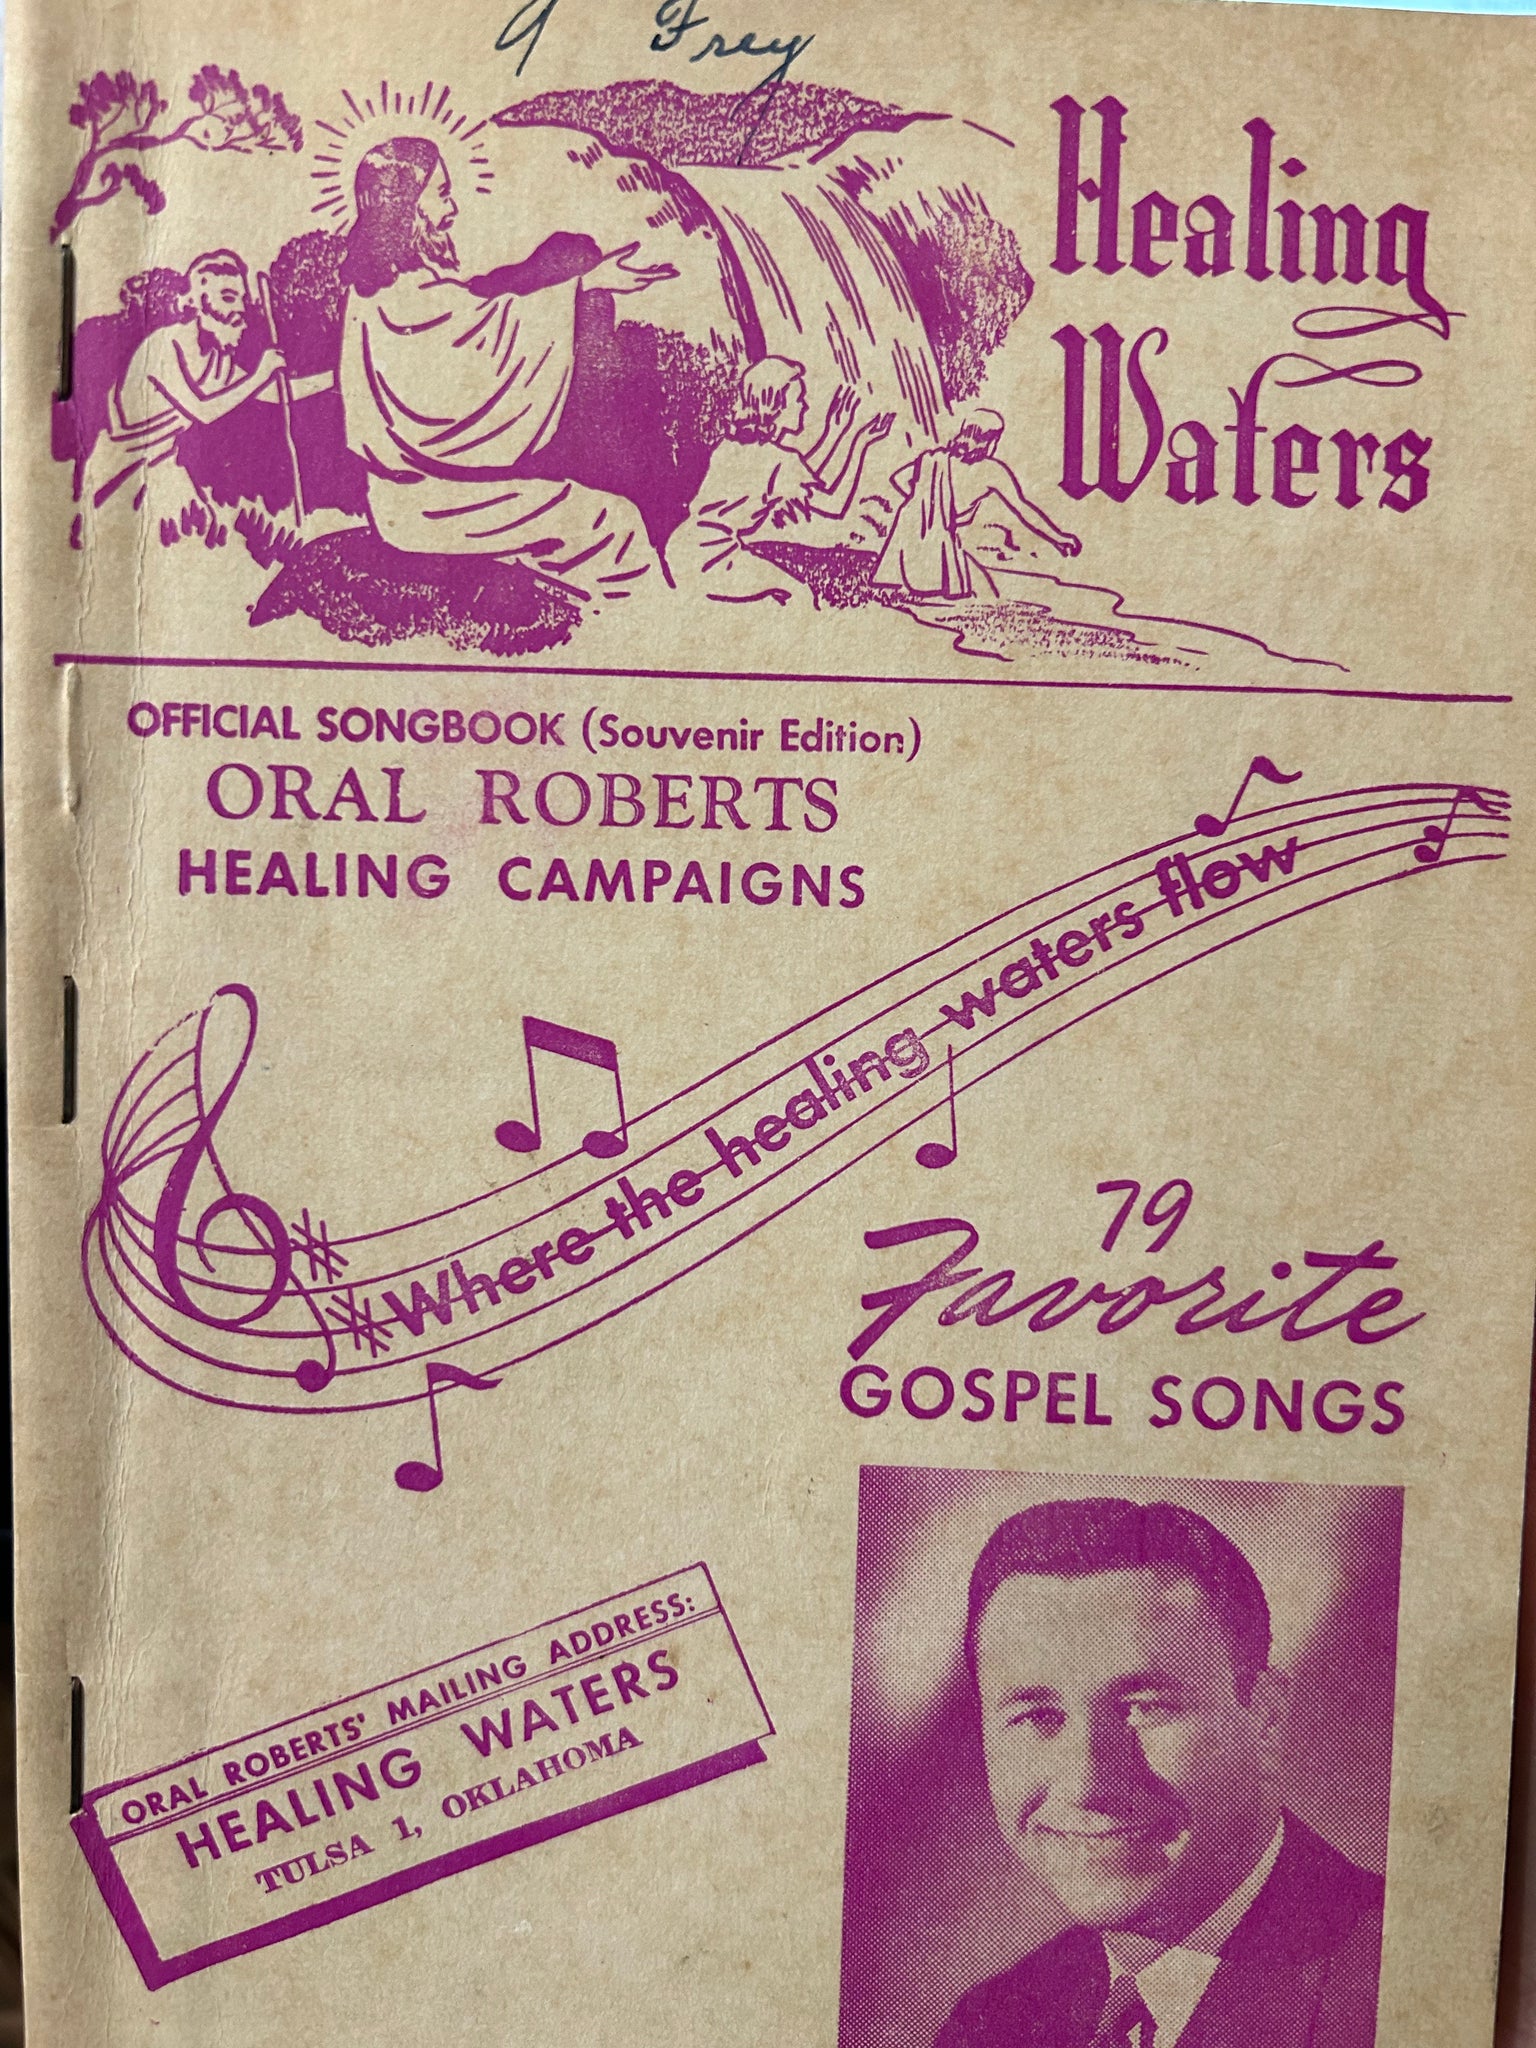 Healing Waters: Oral Roberts Healing Campaigns Official Songbook (Souvenir Edition)